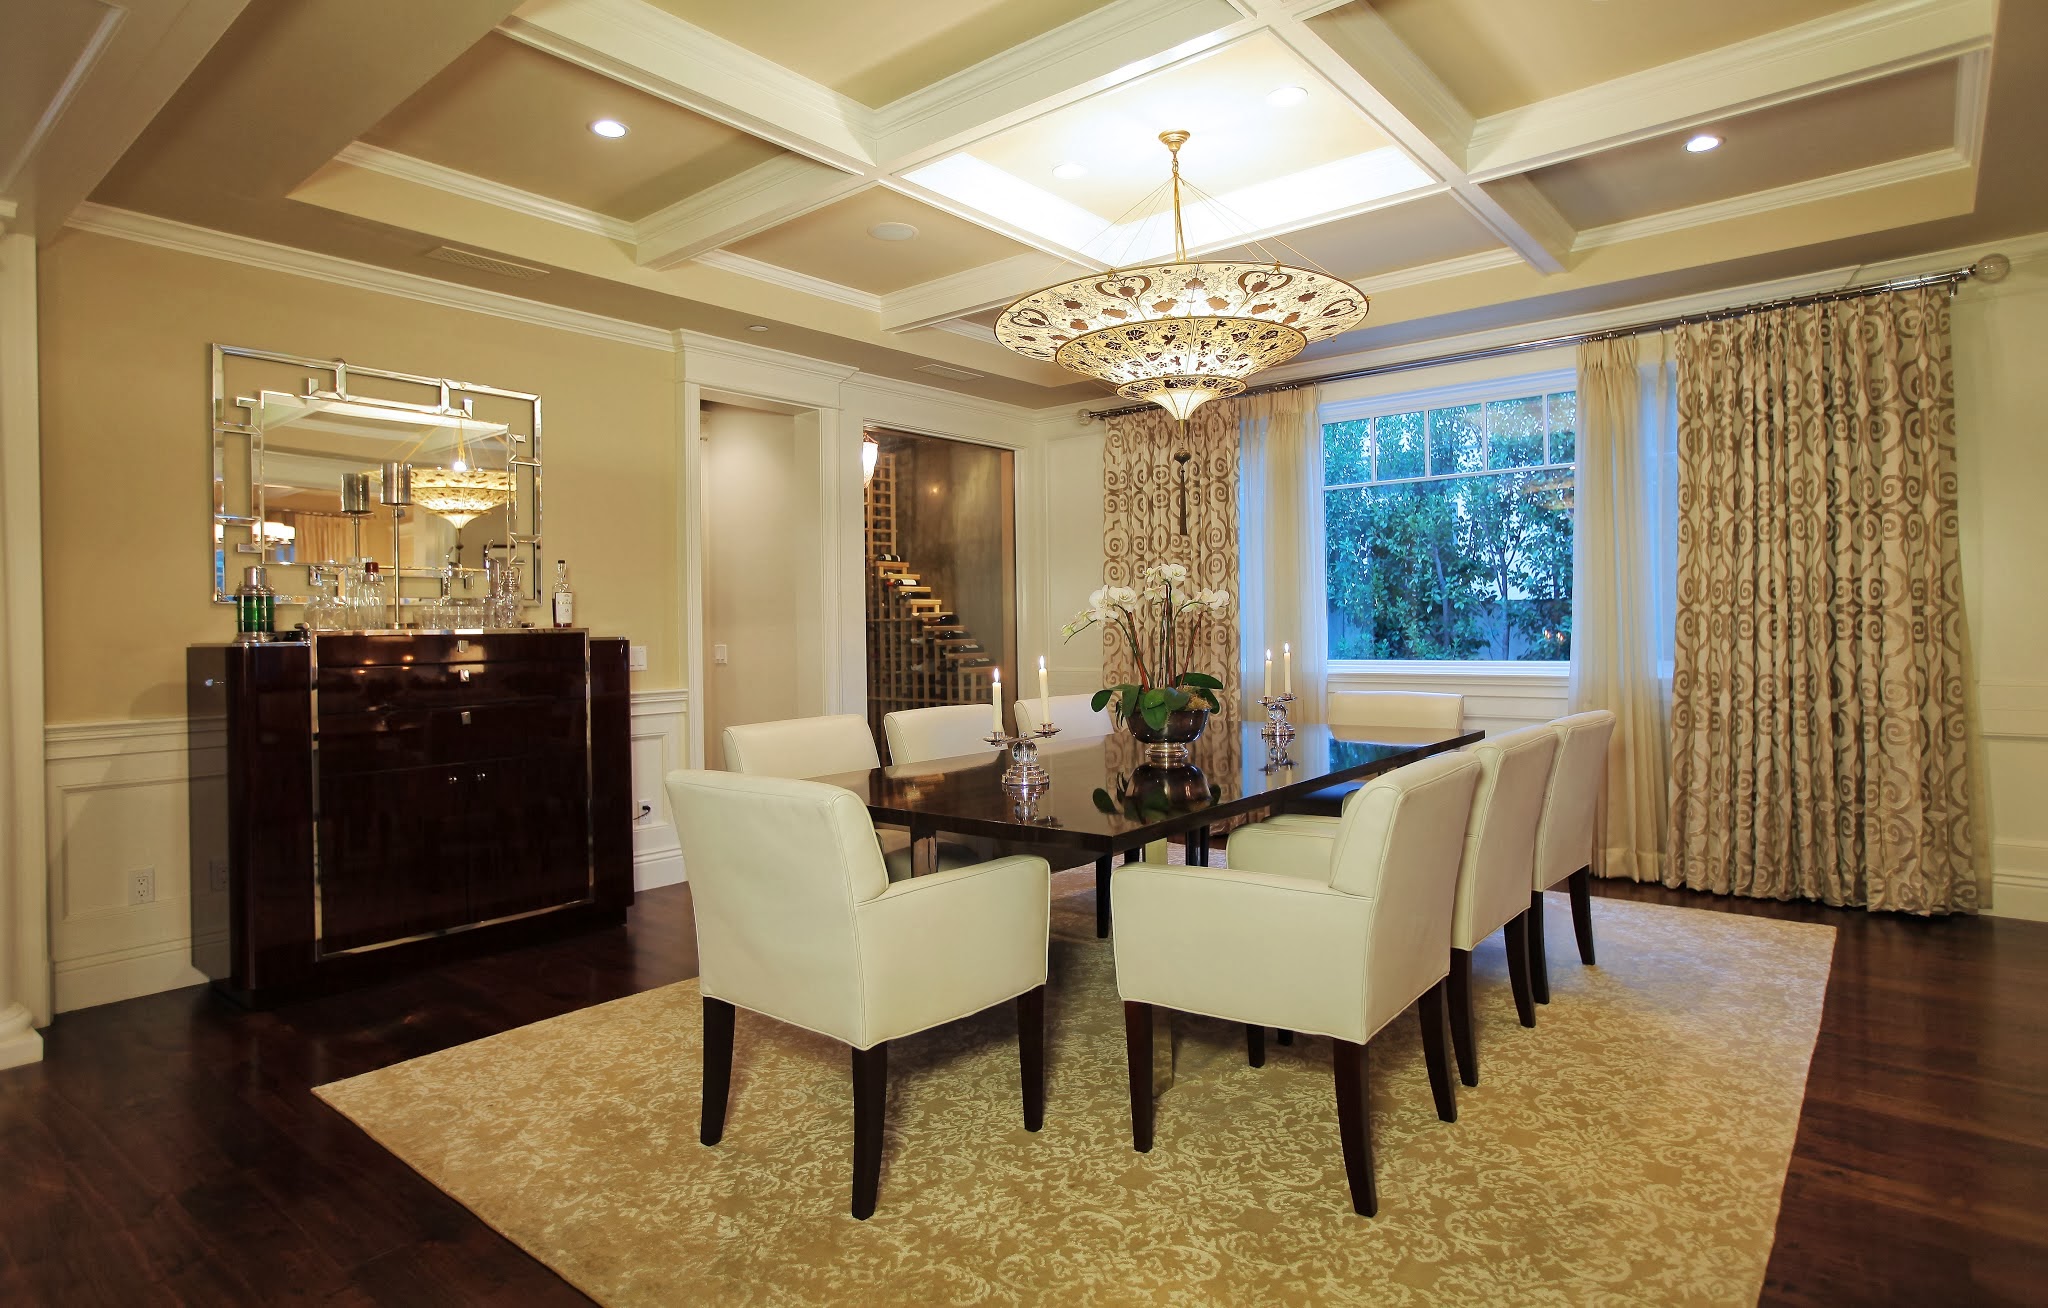 ceiling designs for dining room